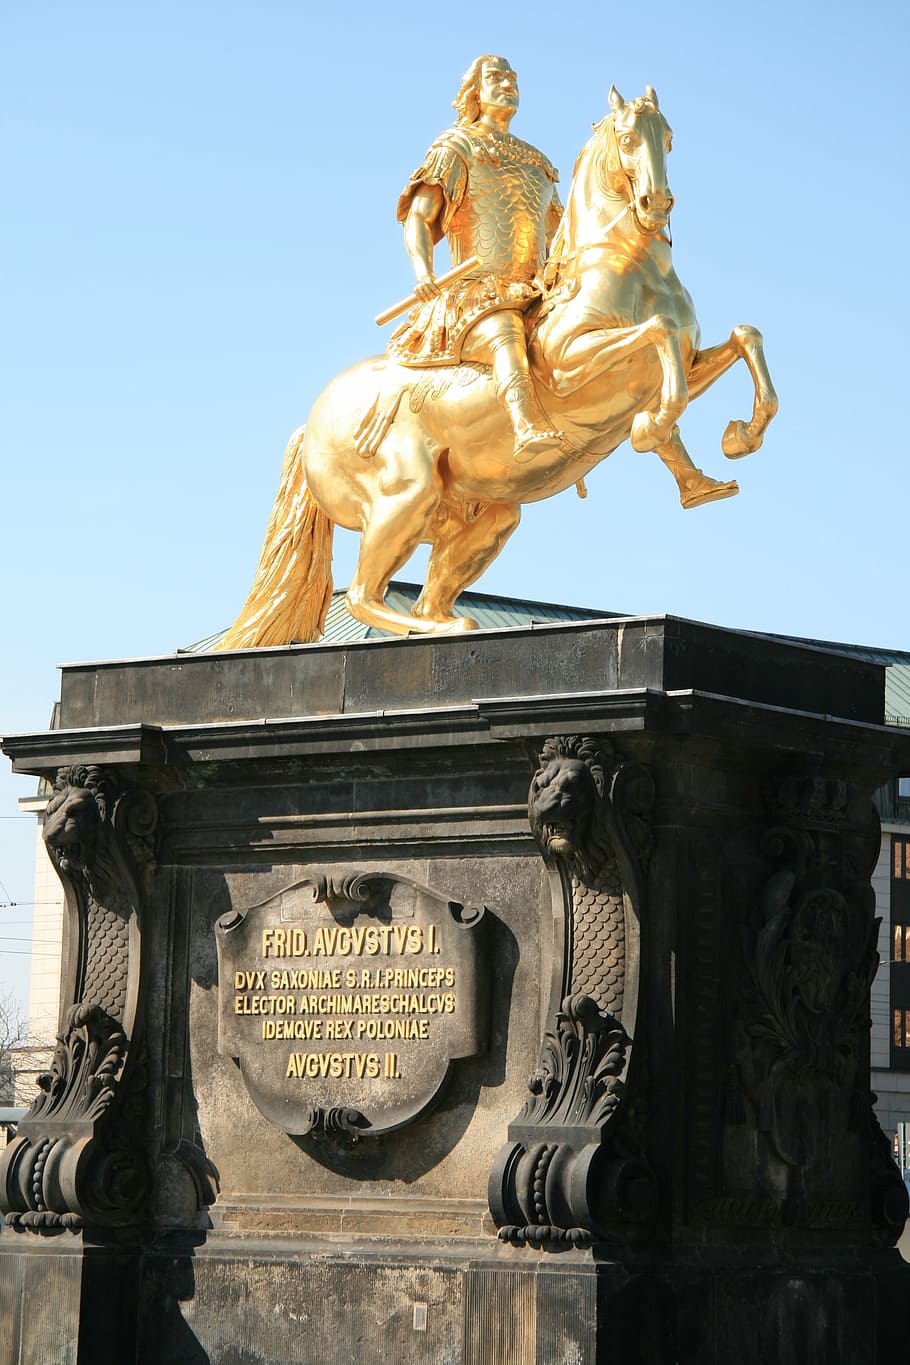 golden rider, dresden, statue, monument, august the strong, architecture, famous Place, sculpture, europe, representation